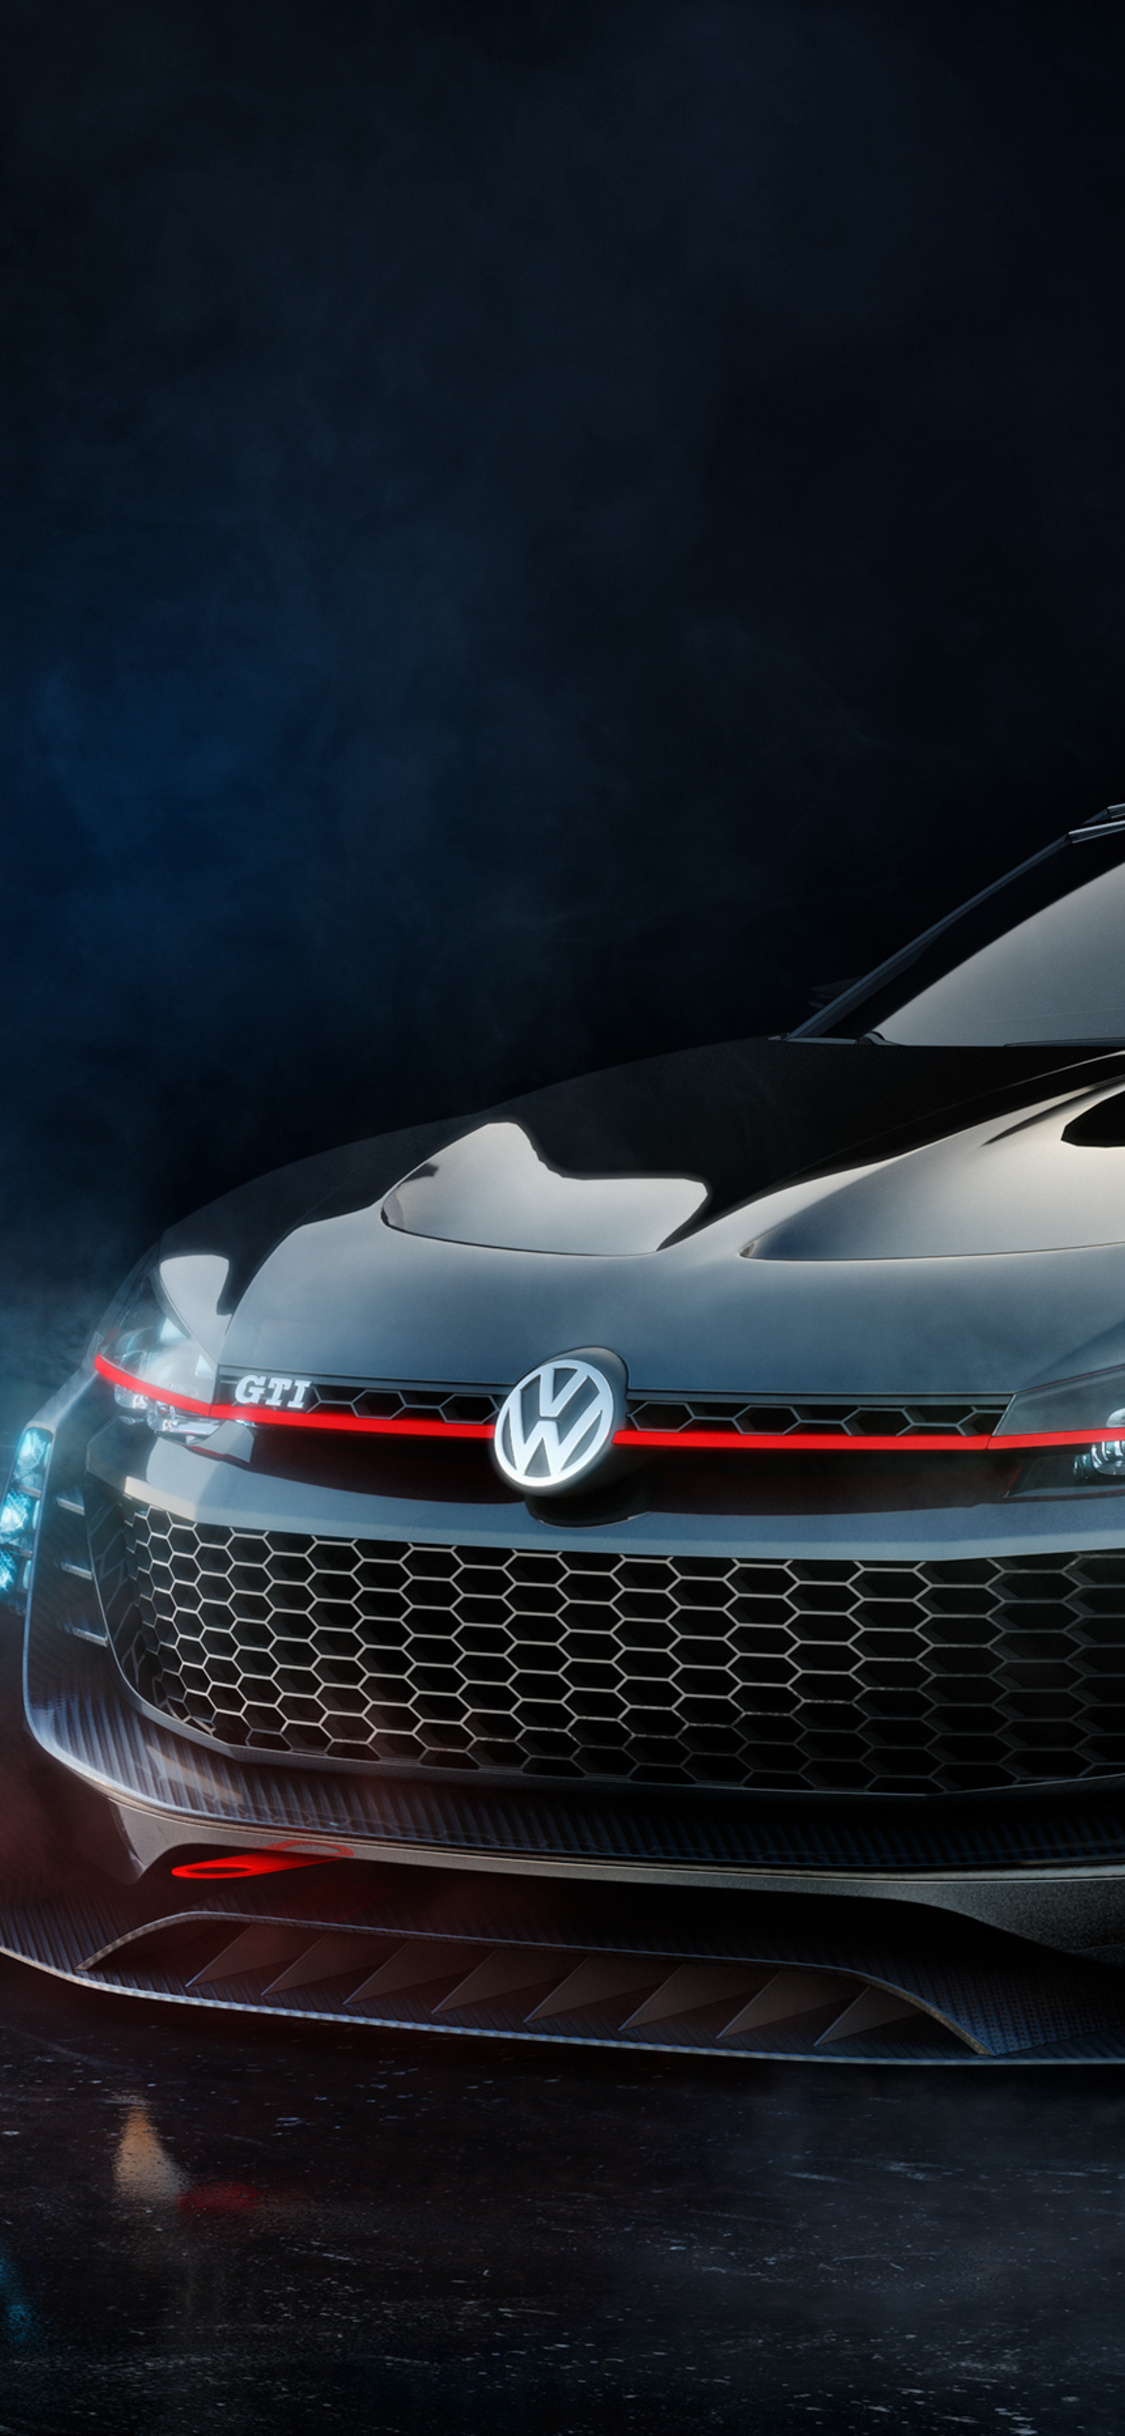 GTI gaming excitement, Gran Turismo inspiration, Captivating visuals, High-speed thrills, 1130x2440 HD Phone